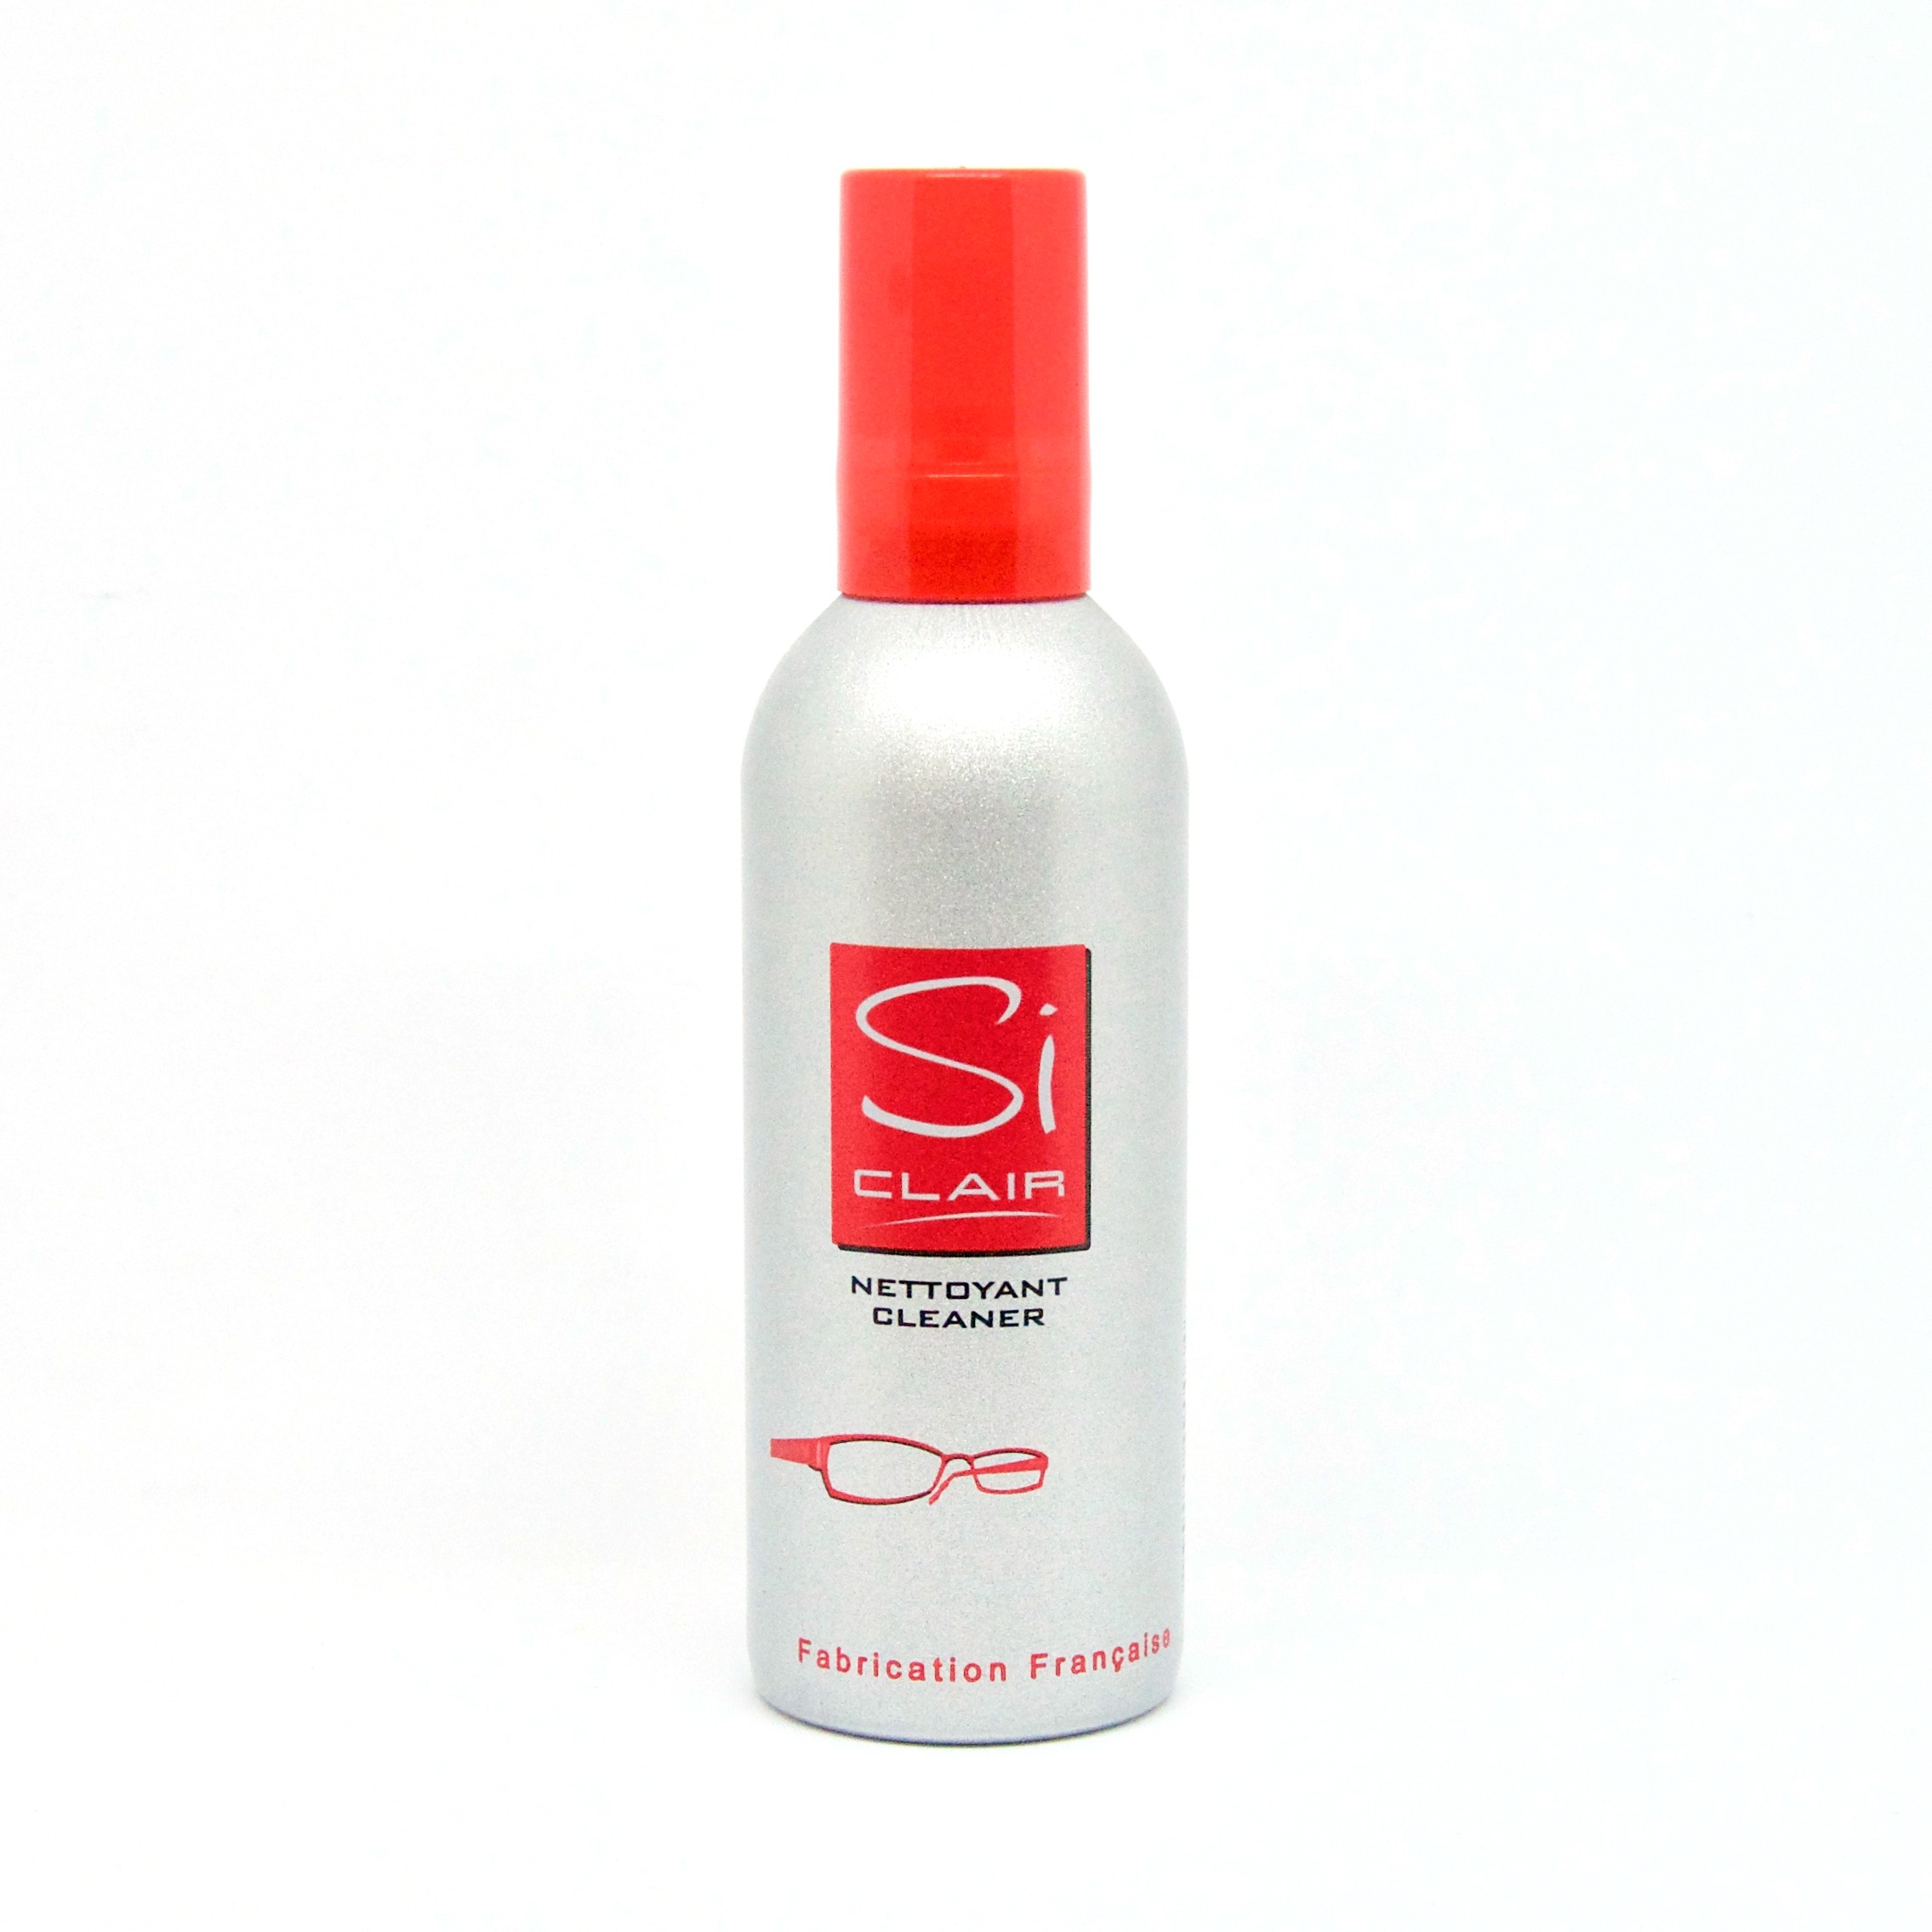 Spray nettoyant Siclair 100ml rechargeable - Michils Opticiens